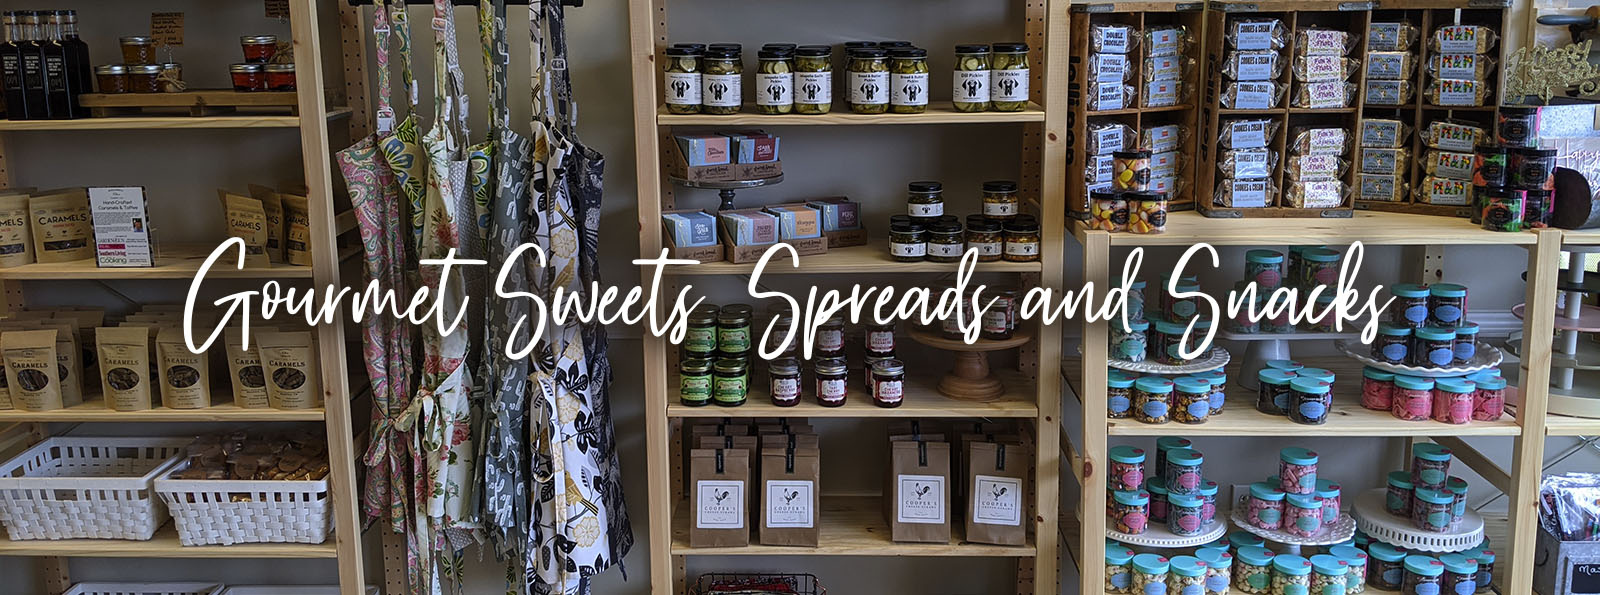 Gourmet Retail Goods, Snacks, Spreads, Sweets